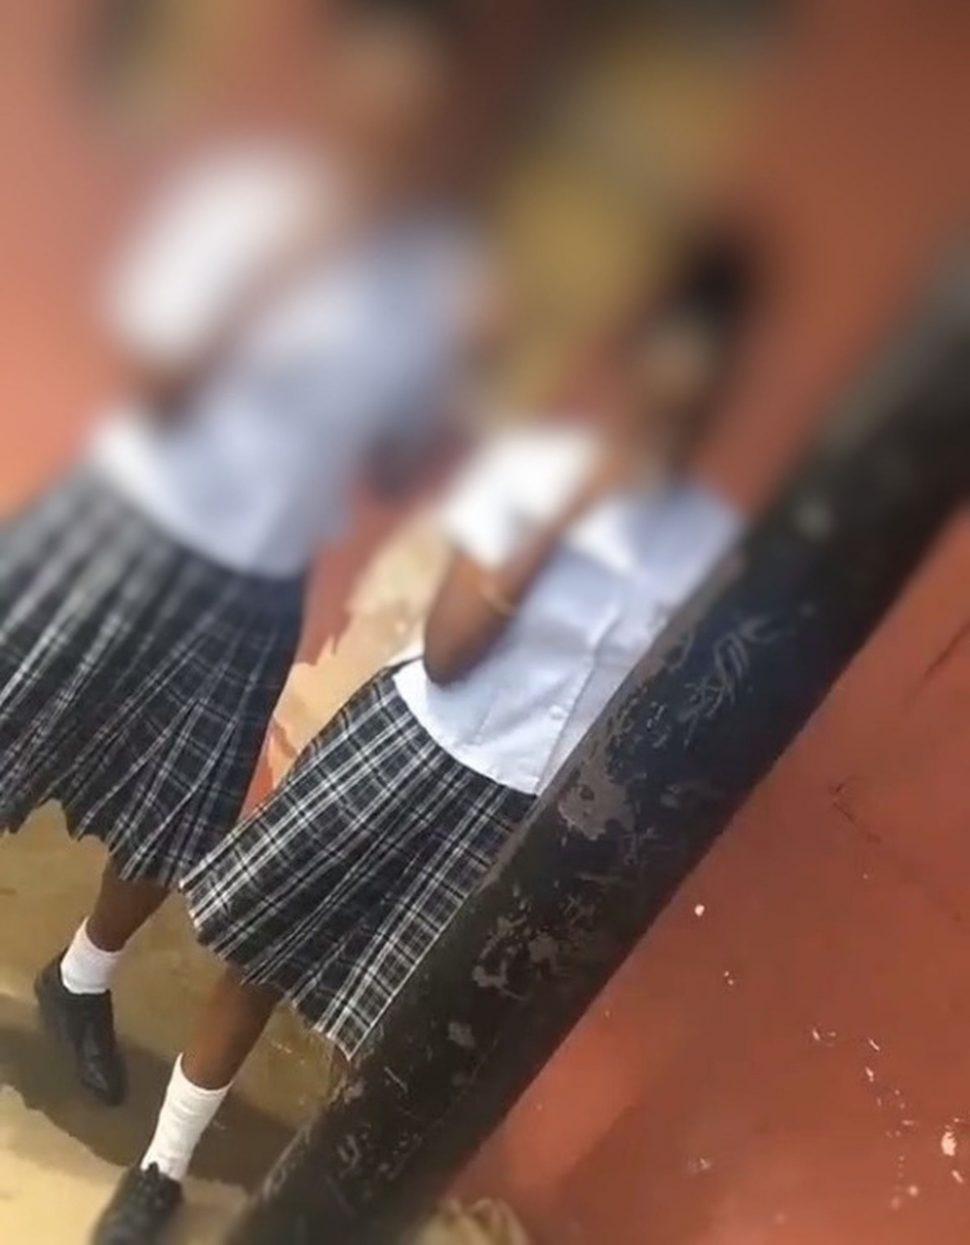 Students of the Diego Martin North Secondary School have been suspended after a video emerged of them apparently smoking marijuana at the school.